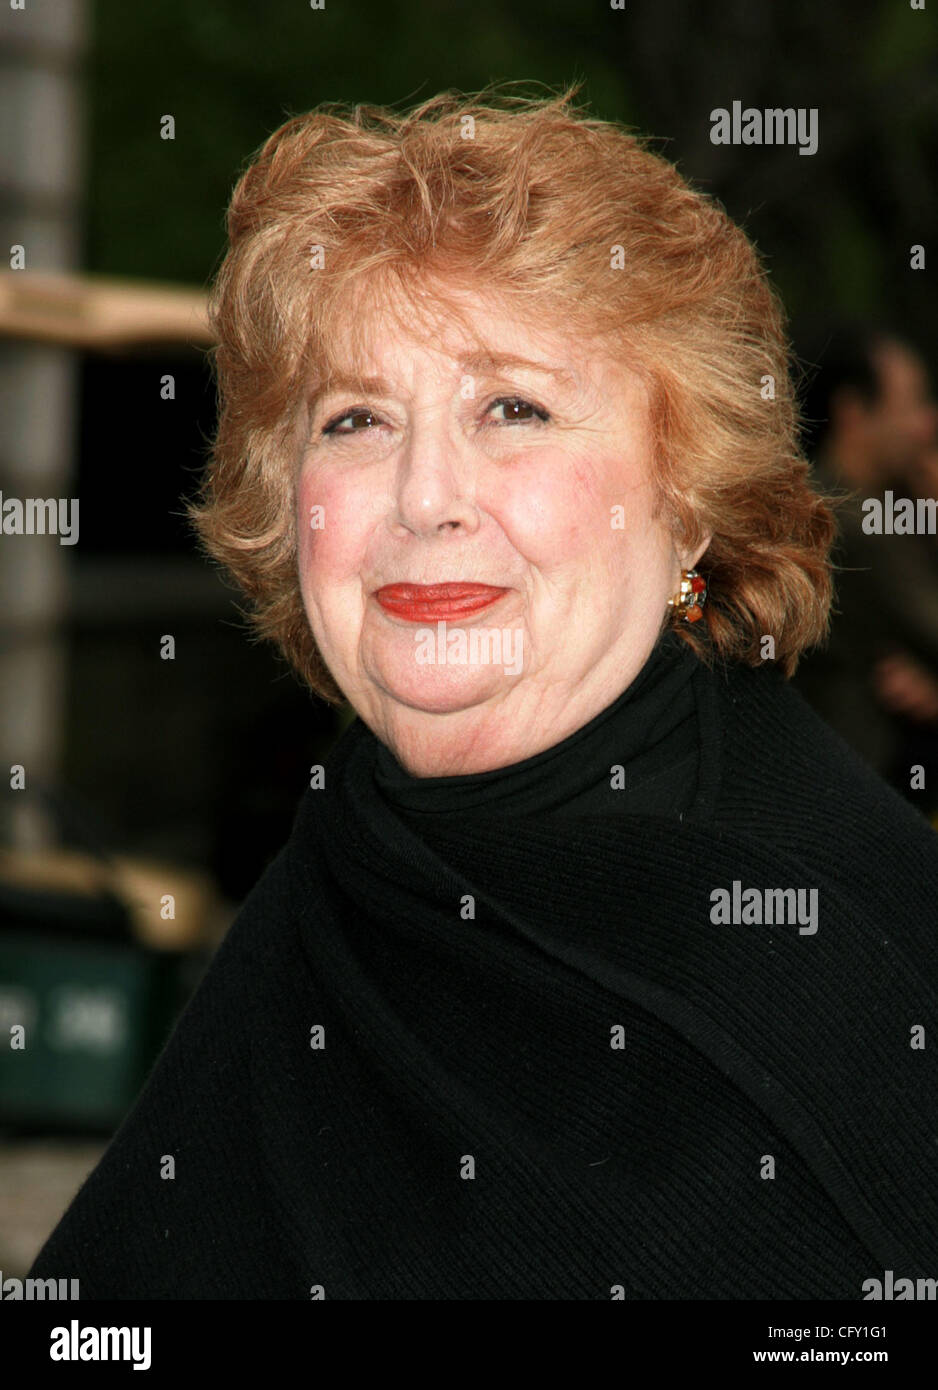 May 02, 2007 - New York, NY, USA - Opera singer BEVERLY SILLS at the arrivals for the 25th Annual Frederick Law Olmsted Awards Luncheon affectionately know as the 'Hat Luncheon' held at Central Park's Conservatory Garden. (Credit Image: © Nancy Kaszerman/ZUMA Press) Stock Photo